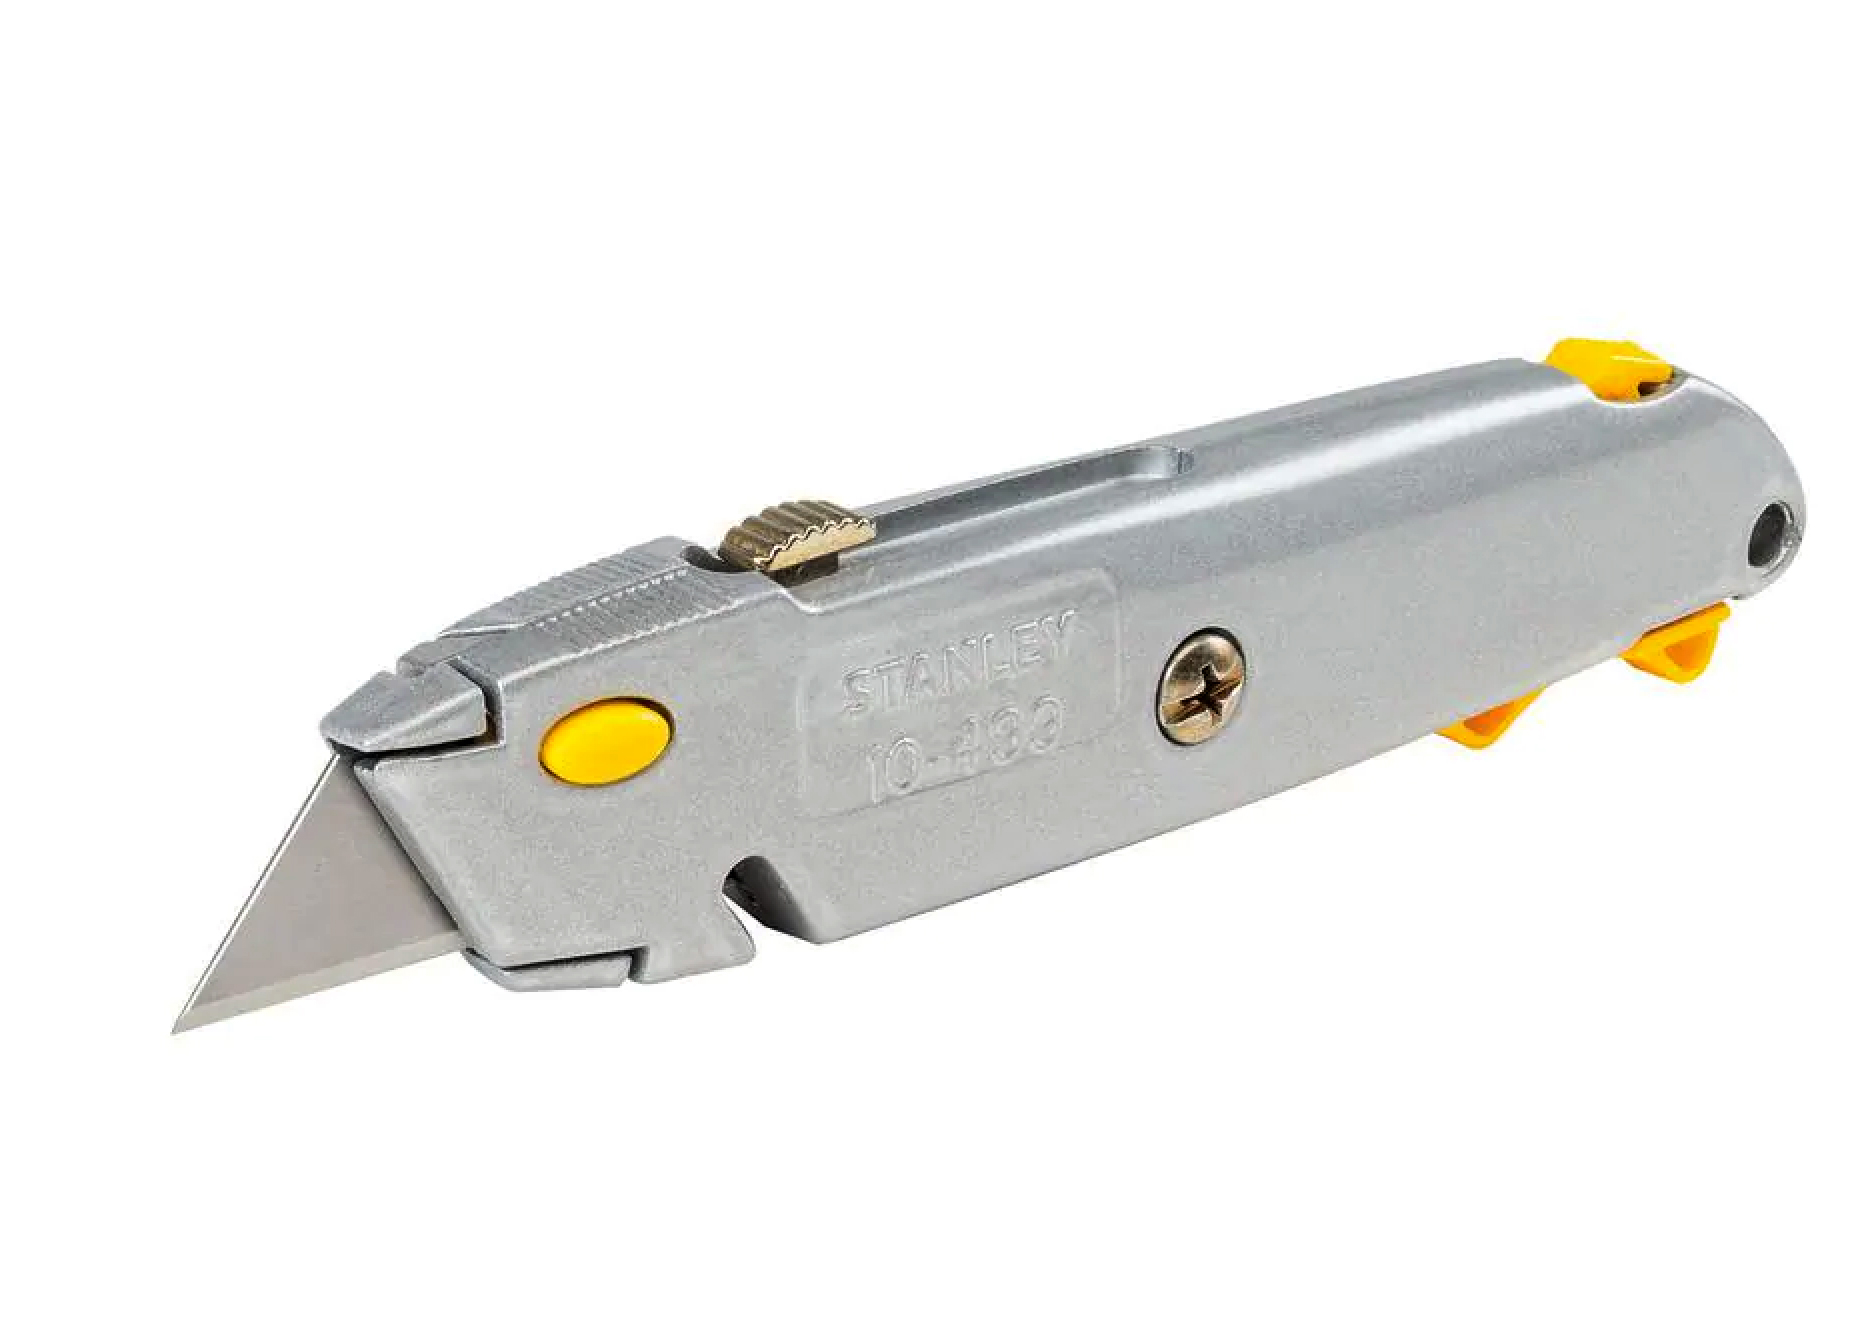 Stanley Quick Change Retractable Utility Knife from Columbia Safety